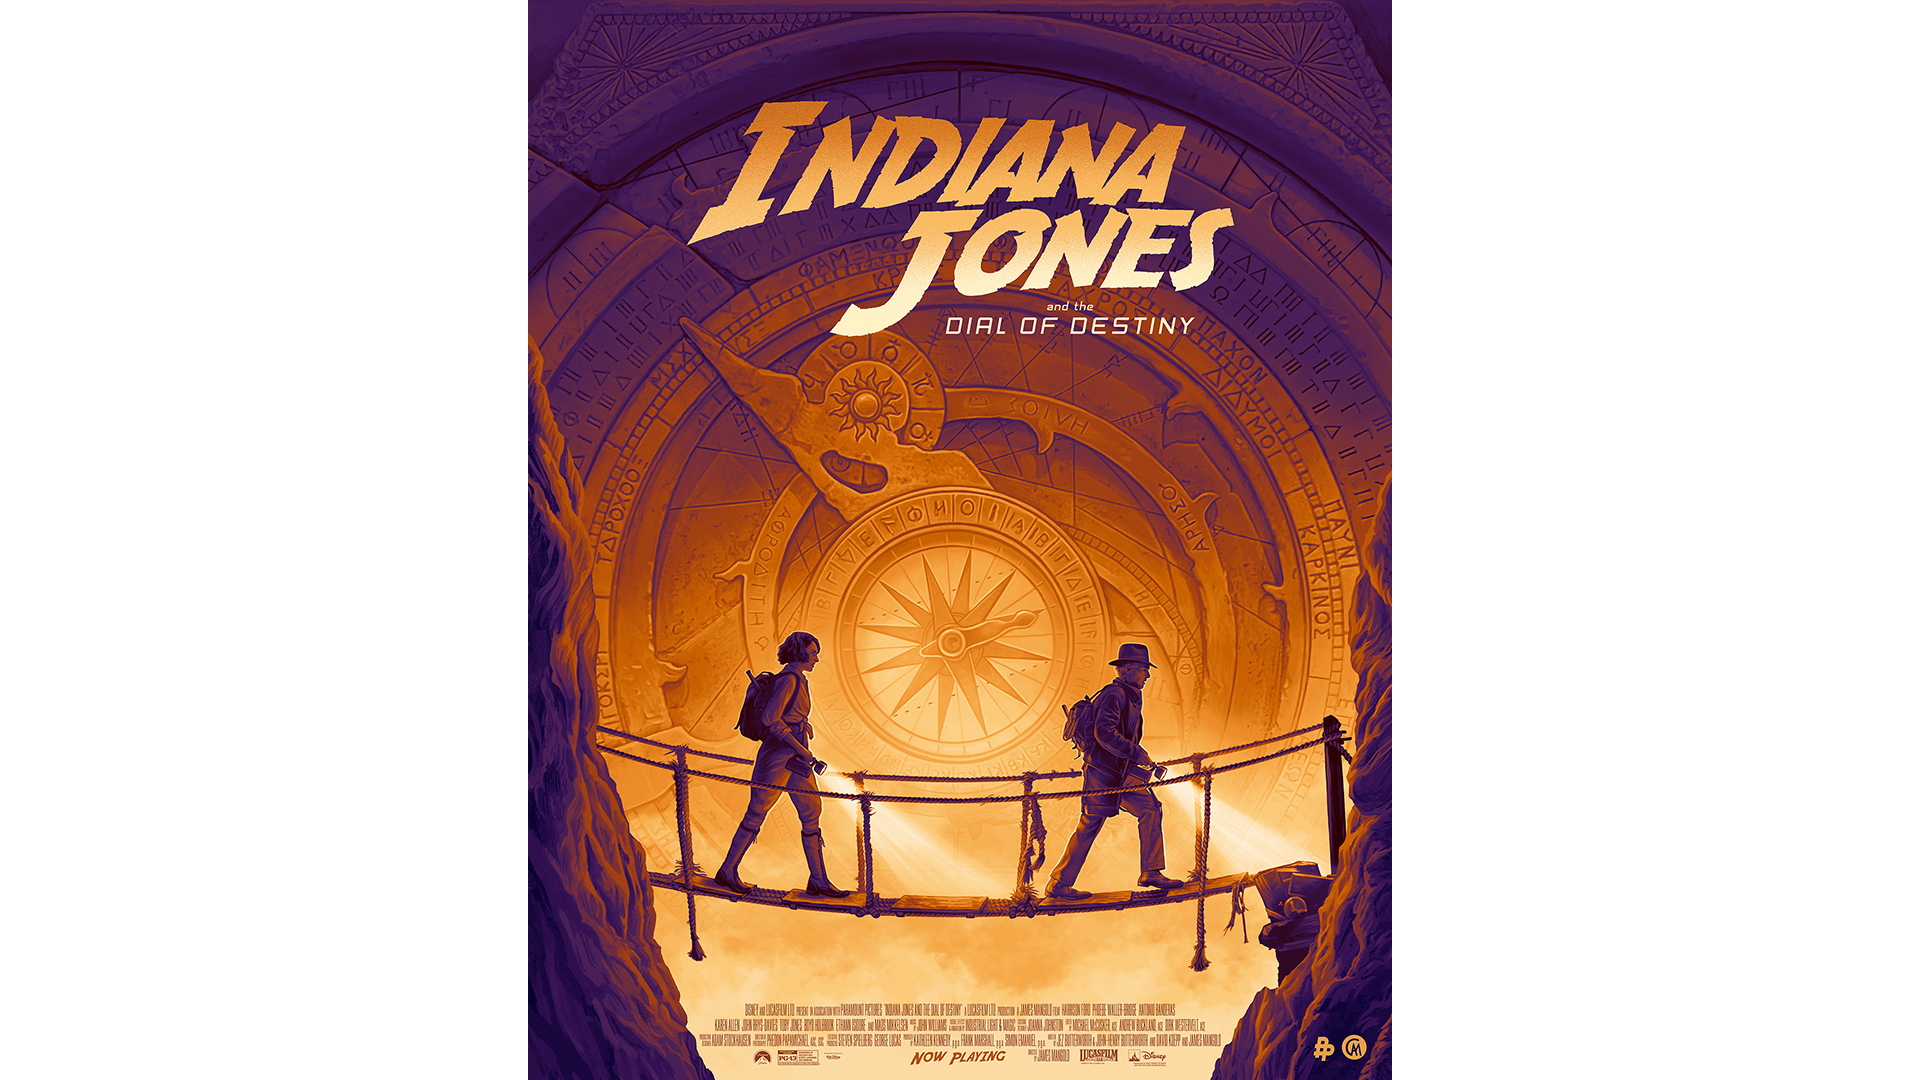 Art by C.A. Martin inspired by Indiana Jones and the Dial of Destiny.